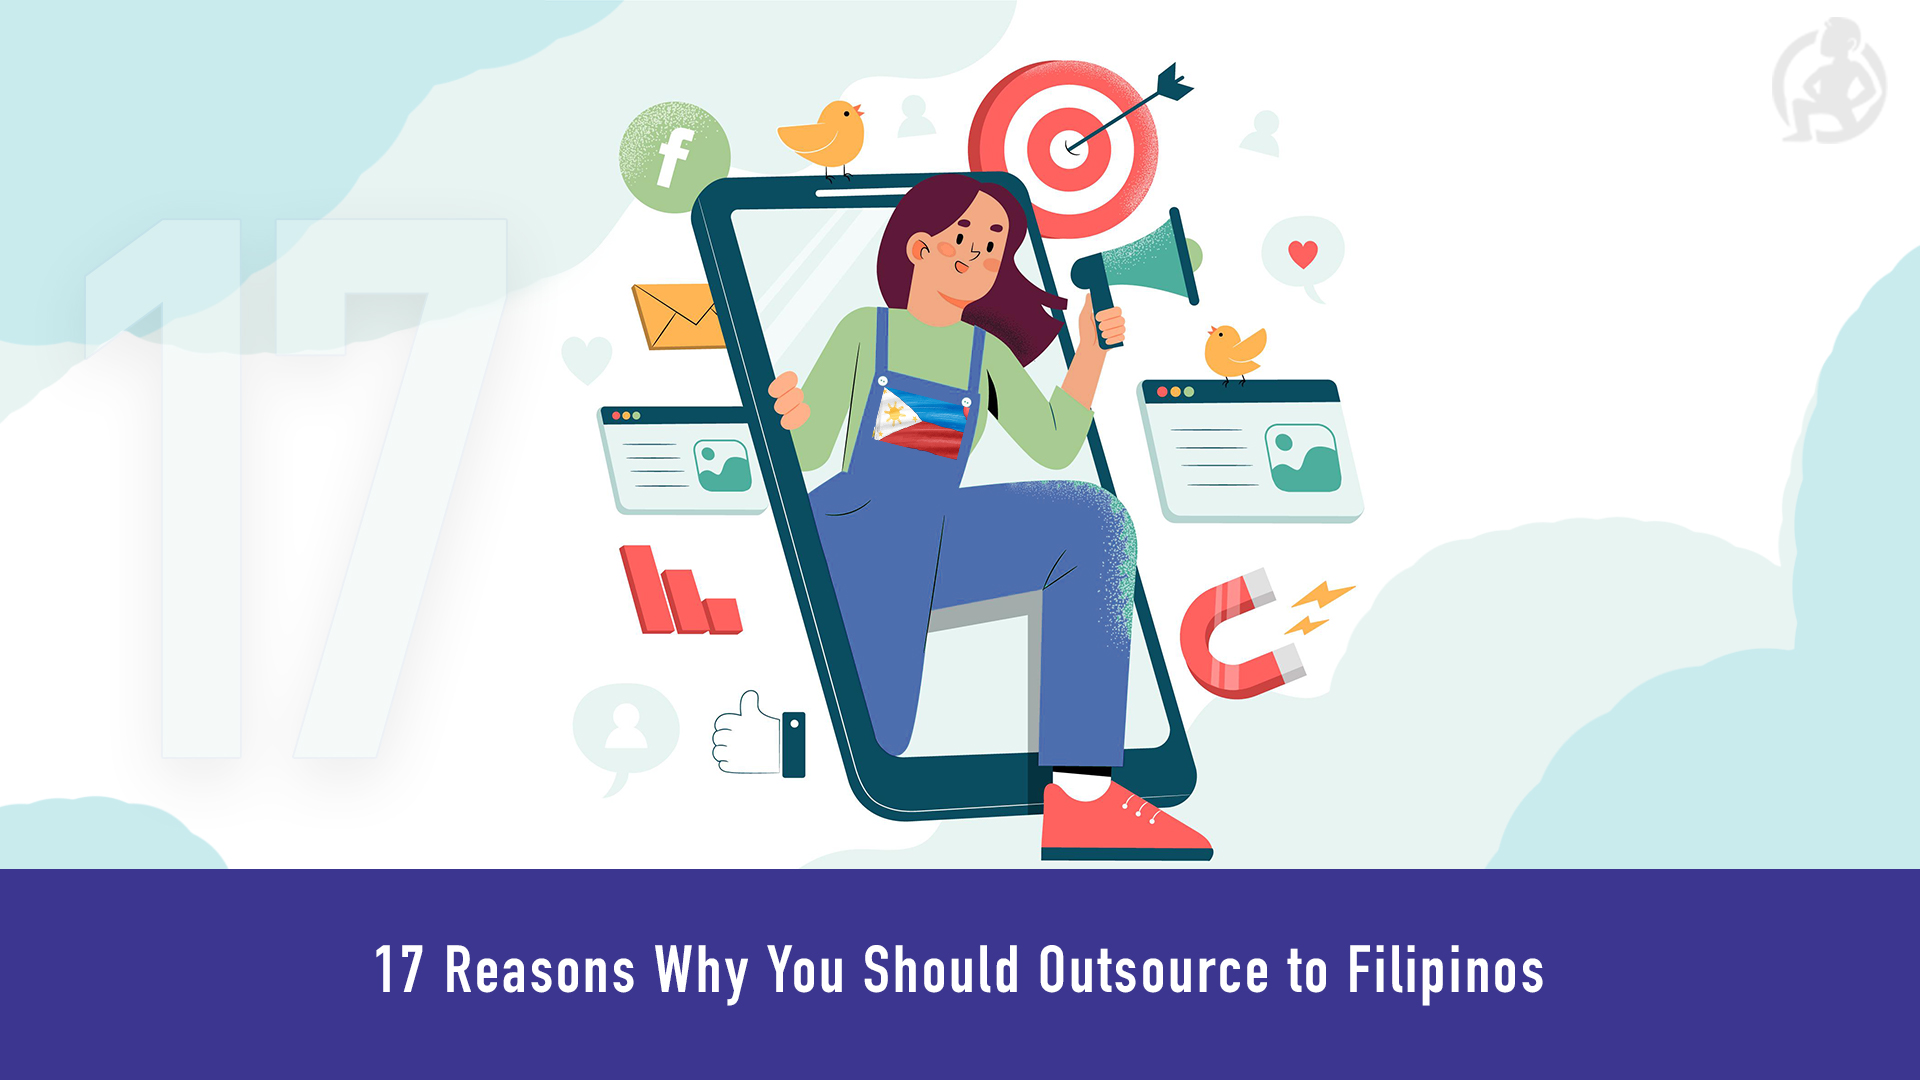 Reasons Why You Should Outsource to Filipinos